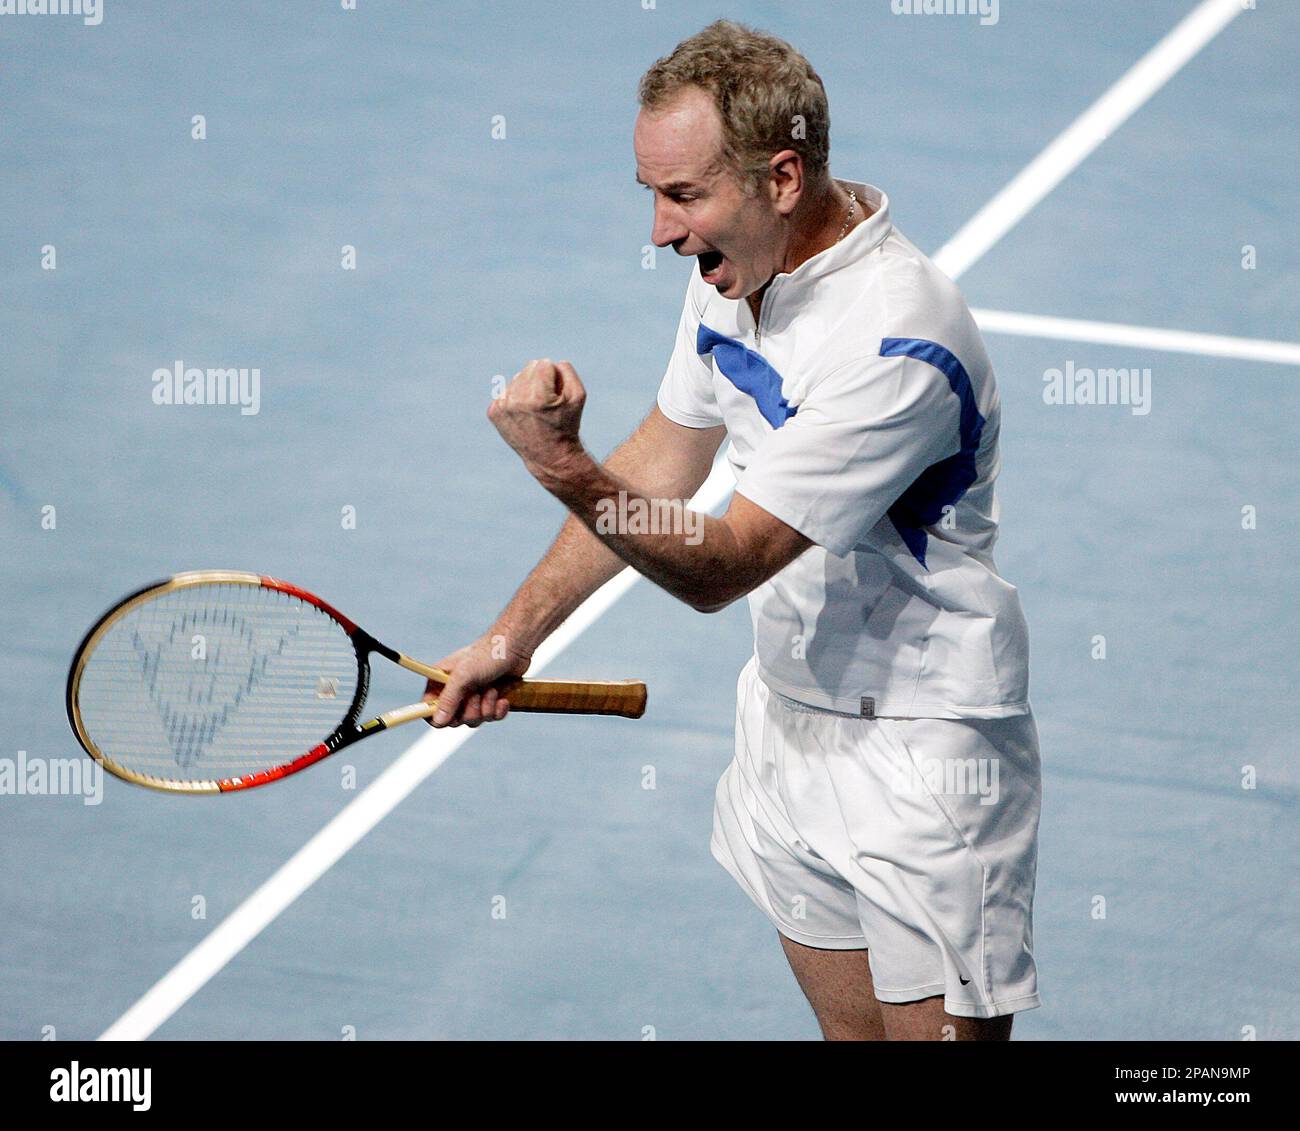 Former tennis pro John McEnroe reacts after winning against Boris Becker at  the Masters of Legends tennis tournament in Duesseldorf, Germany,  Wednesday, Dec. 19, 2007. McEnroe won the one set match in